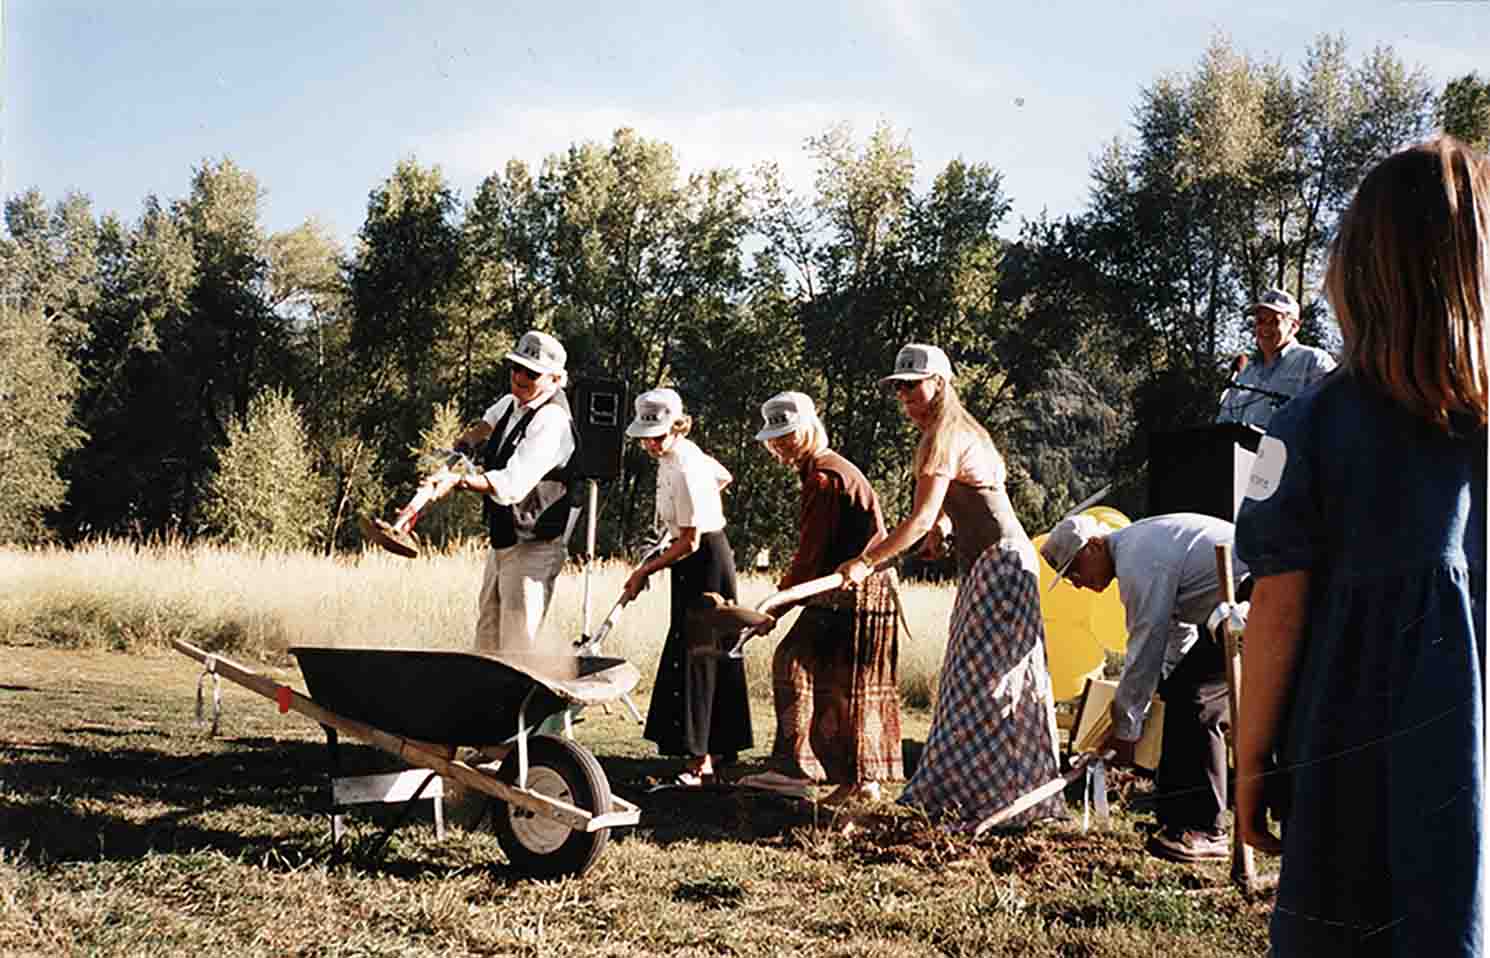 One color photograph of Leon Lederman, Judith Barnard, Judy Schramm, Debbie Flug, Murray Gell-Marm and Dave Schramm with shovels, digging at the ceremonial ground breaking for the new Aspen Center for Physics on September 1, 1995. Photo courtesy of Aspen Historical Society.